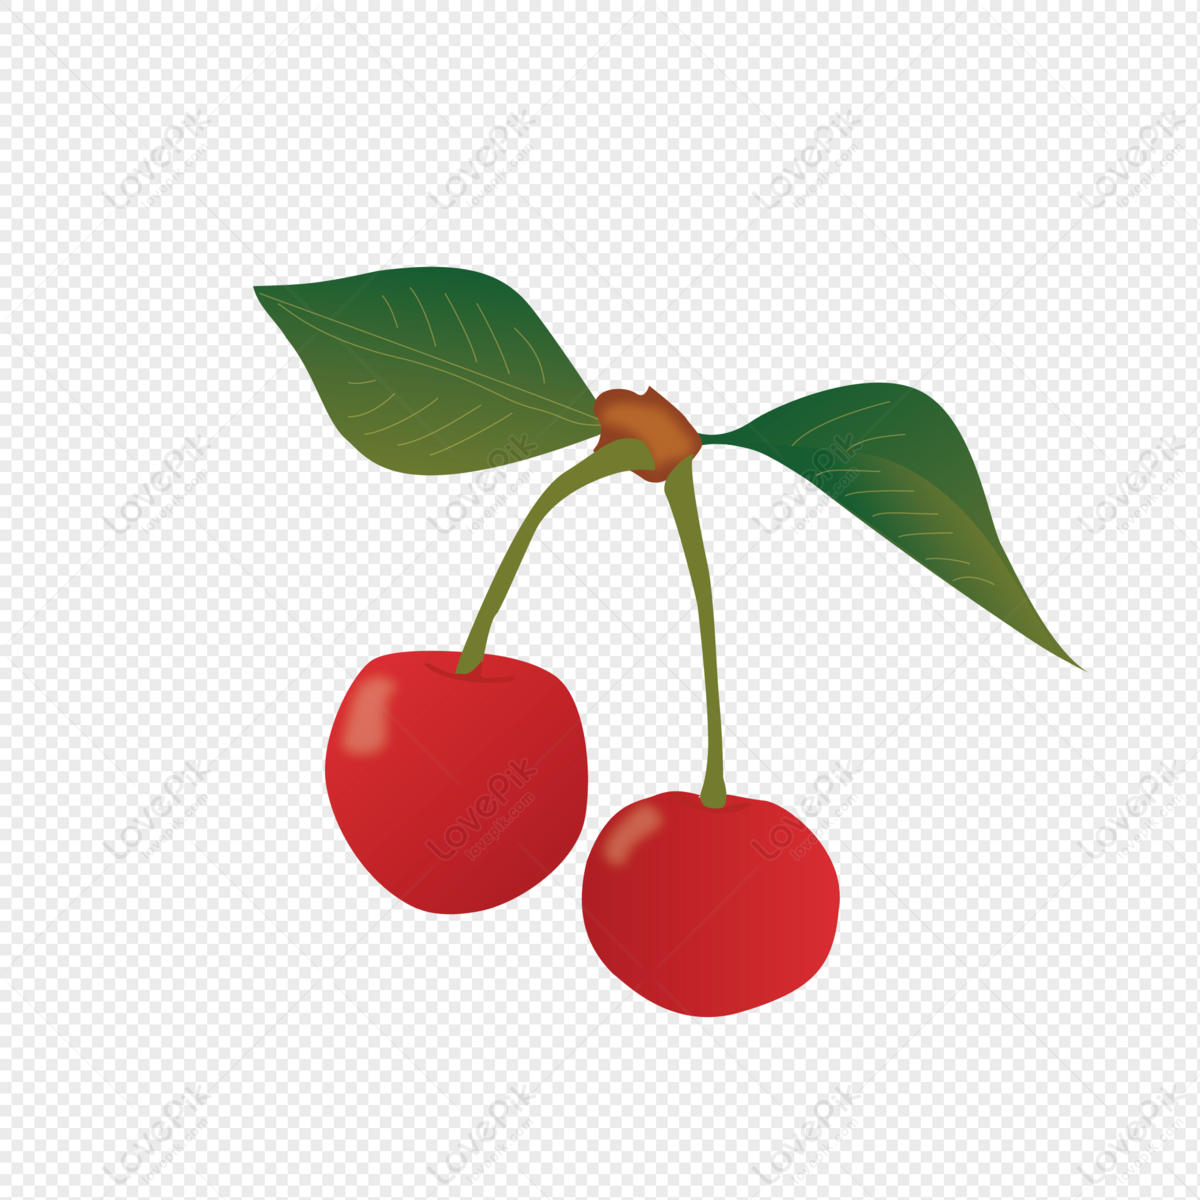 Cartoon Cherry Images, HD Pictures For Free Vectors Download 